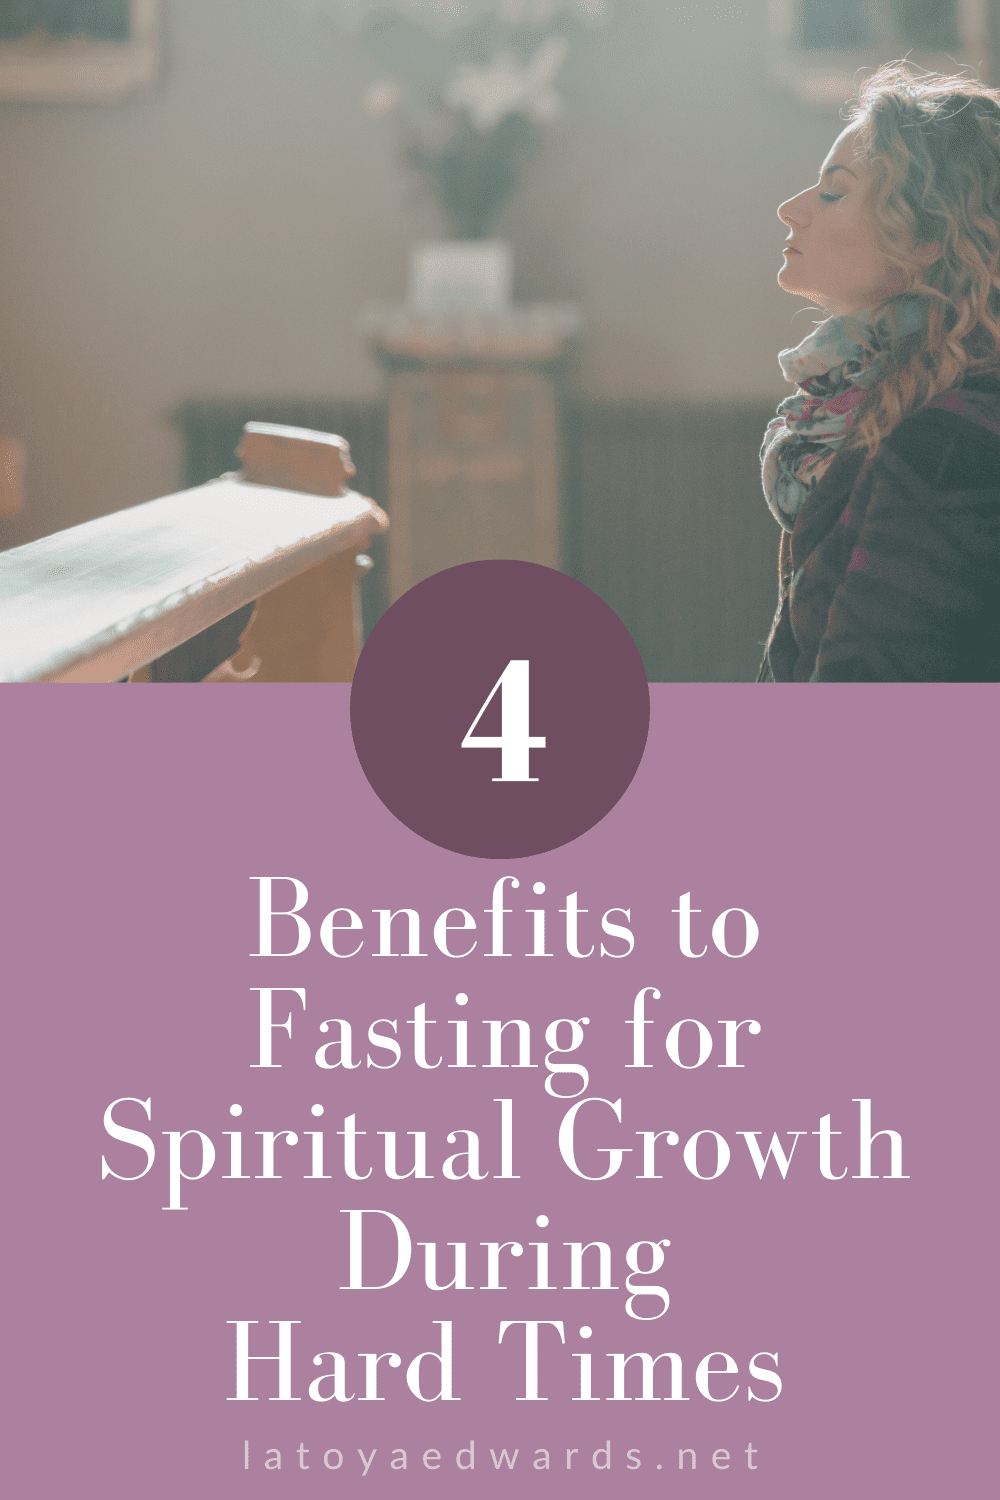 Fasting is a great way to grow closer to God especially when you are walking through hard times. This spiritual growth idea is perfect for any Christian woman walking through trials and storms. Learn why you may have been frustrated by fasting in the past + 4 reasons it can be super effective in hard seasons. Plus a few tips on how to get started if you're new to fasting.